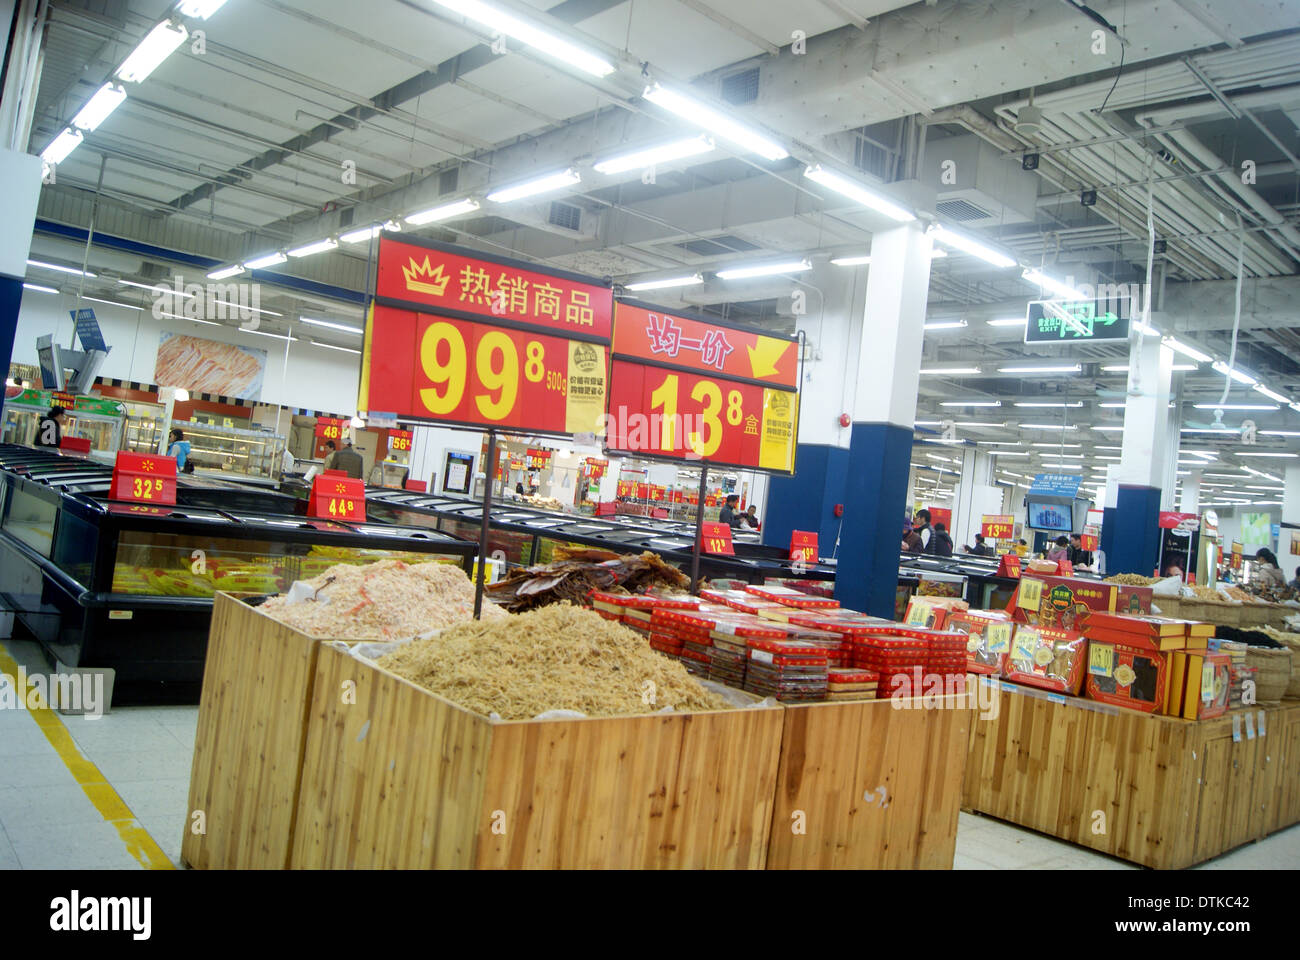 Wal-mart in China. People in the shopping. Stock Photo